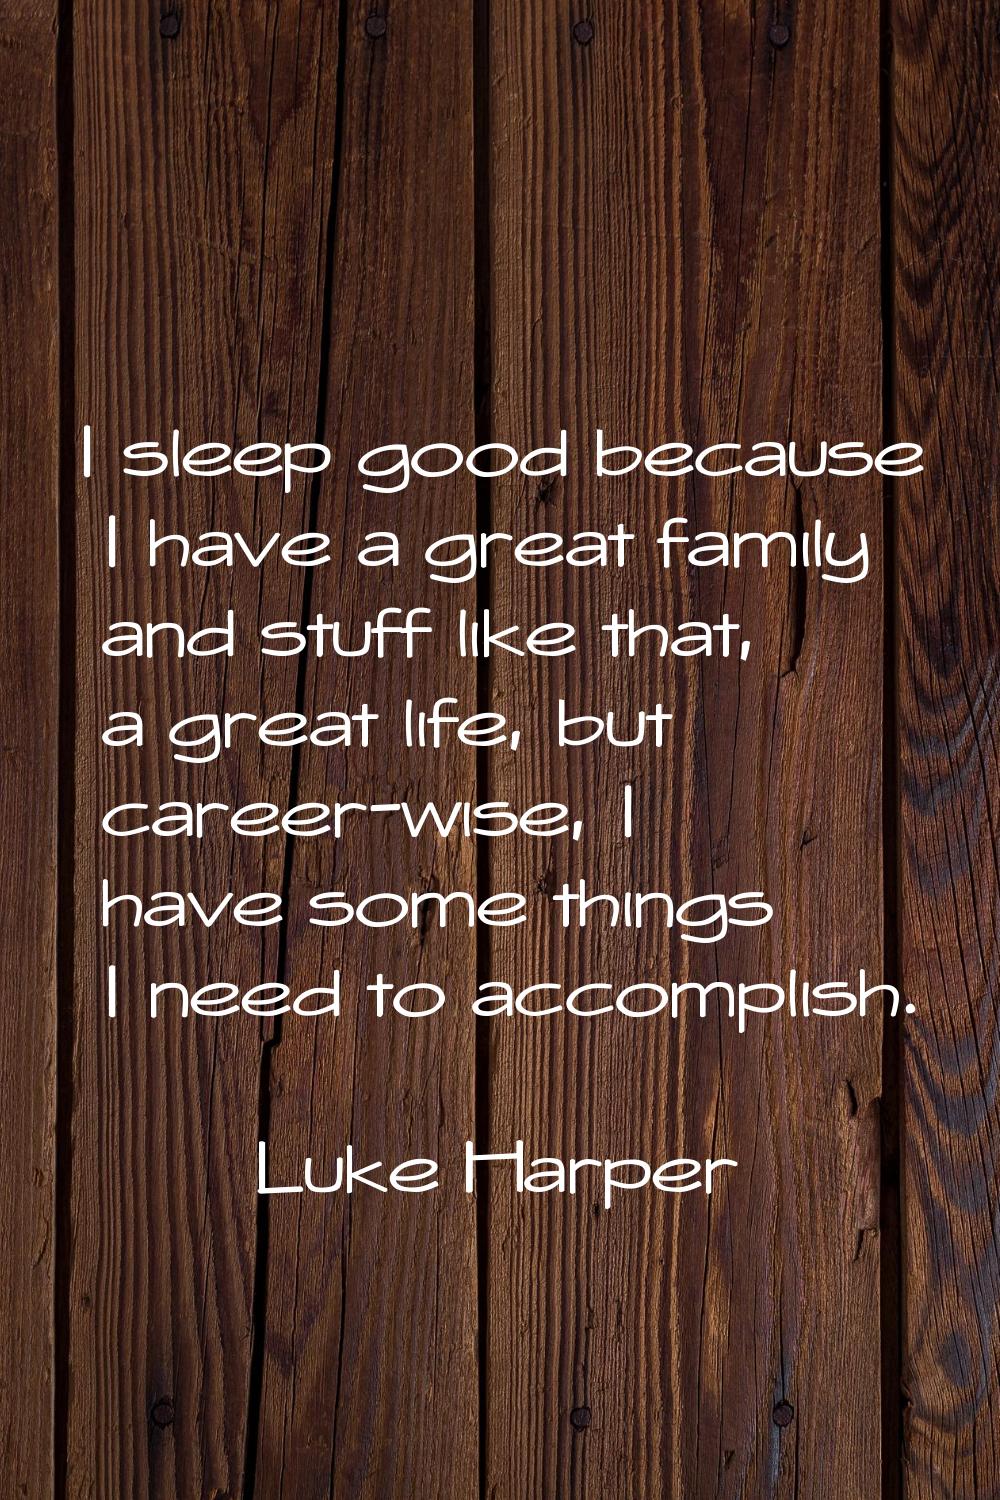 I sleep good because I have a great family and stuff like that, a great life, but career-wise, I ha